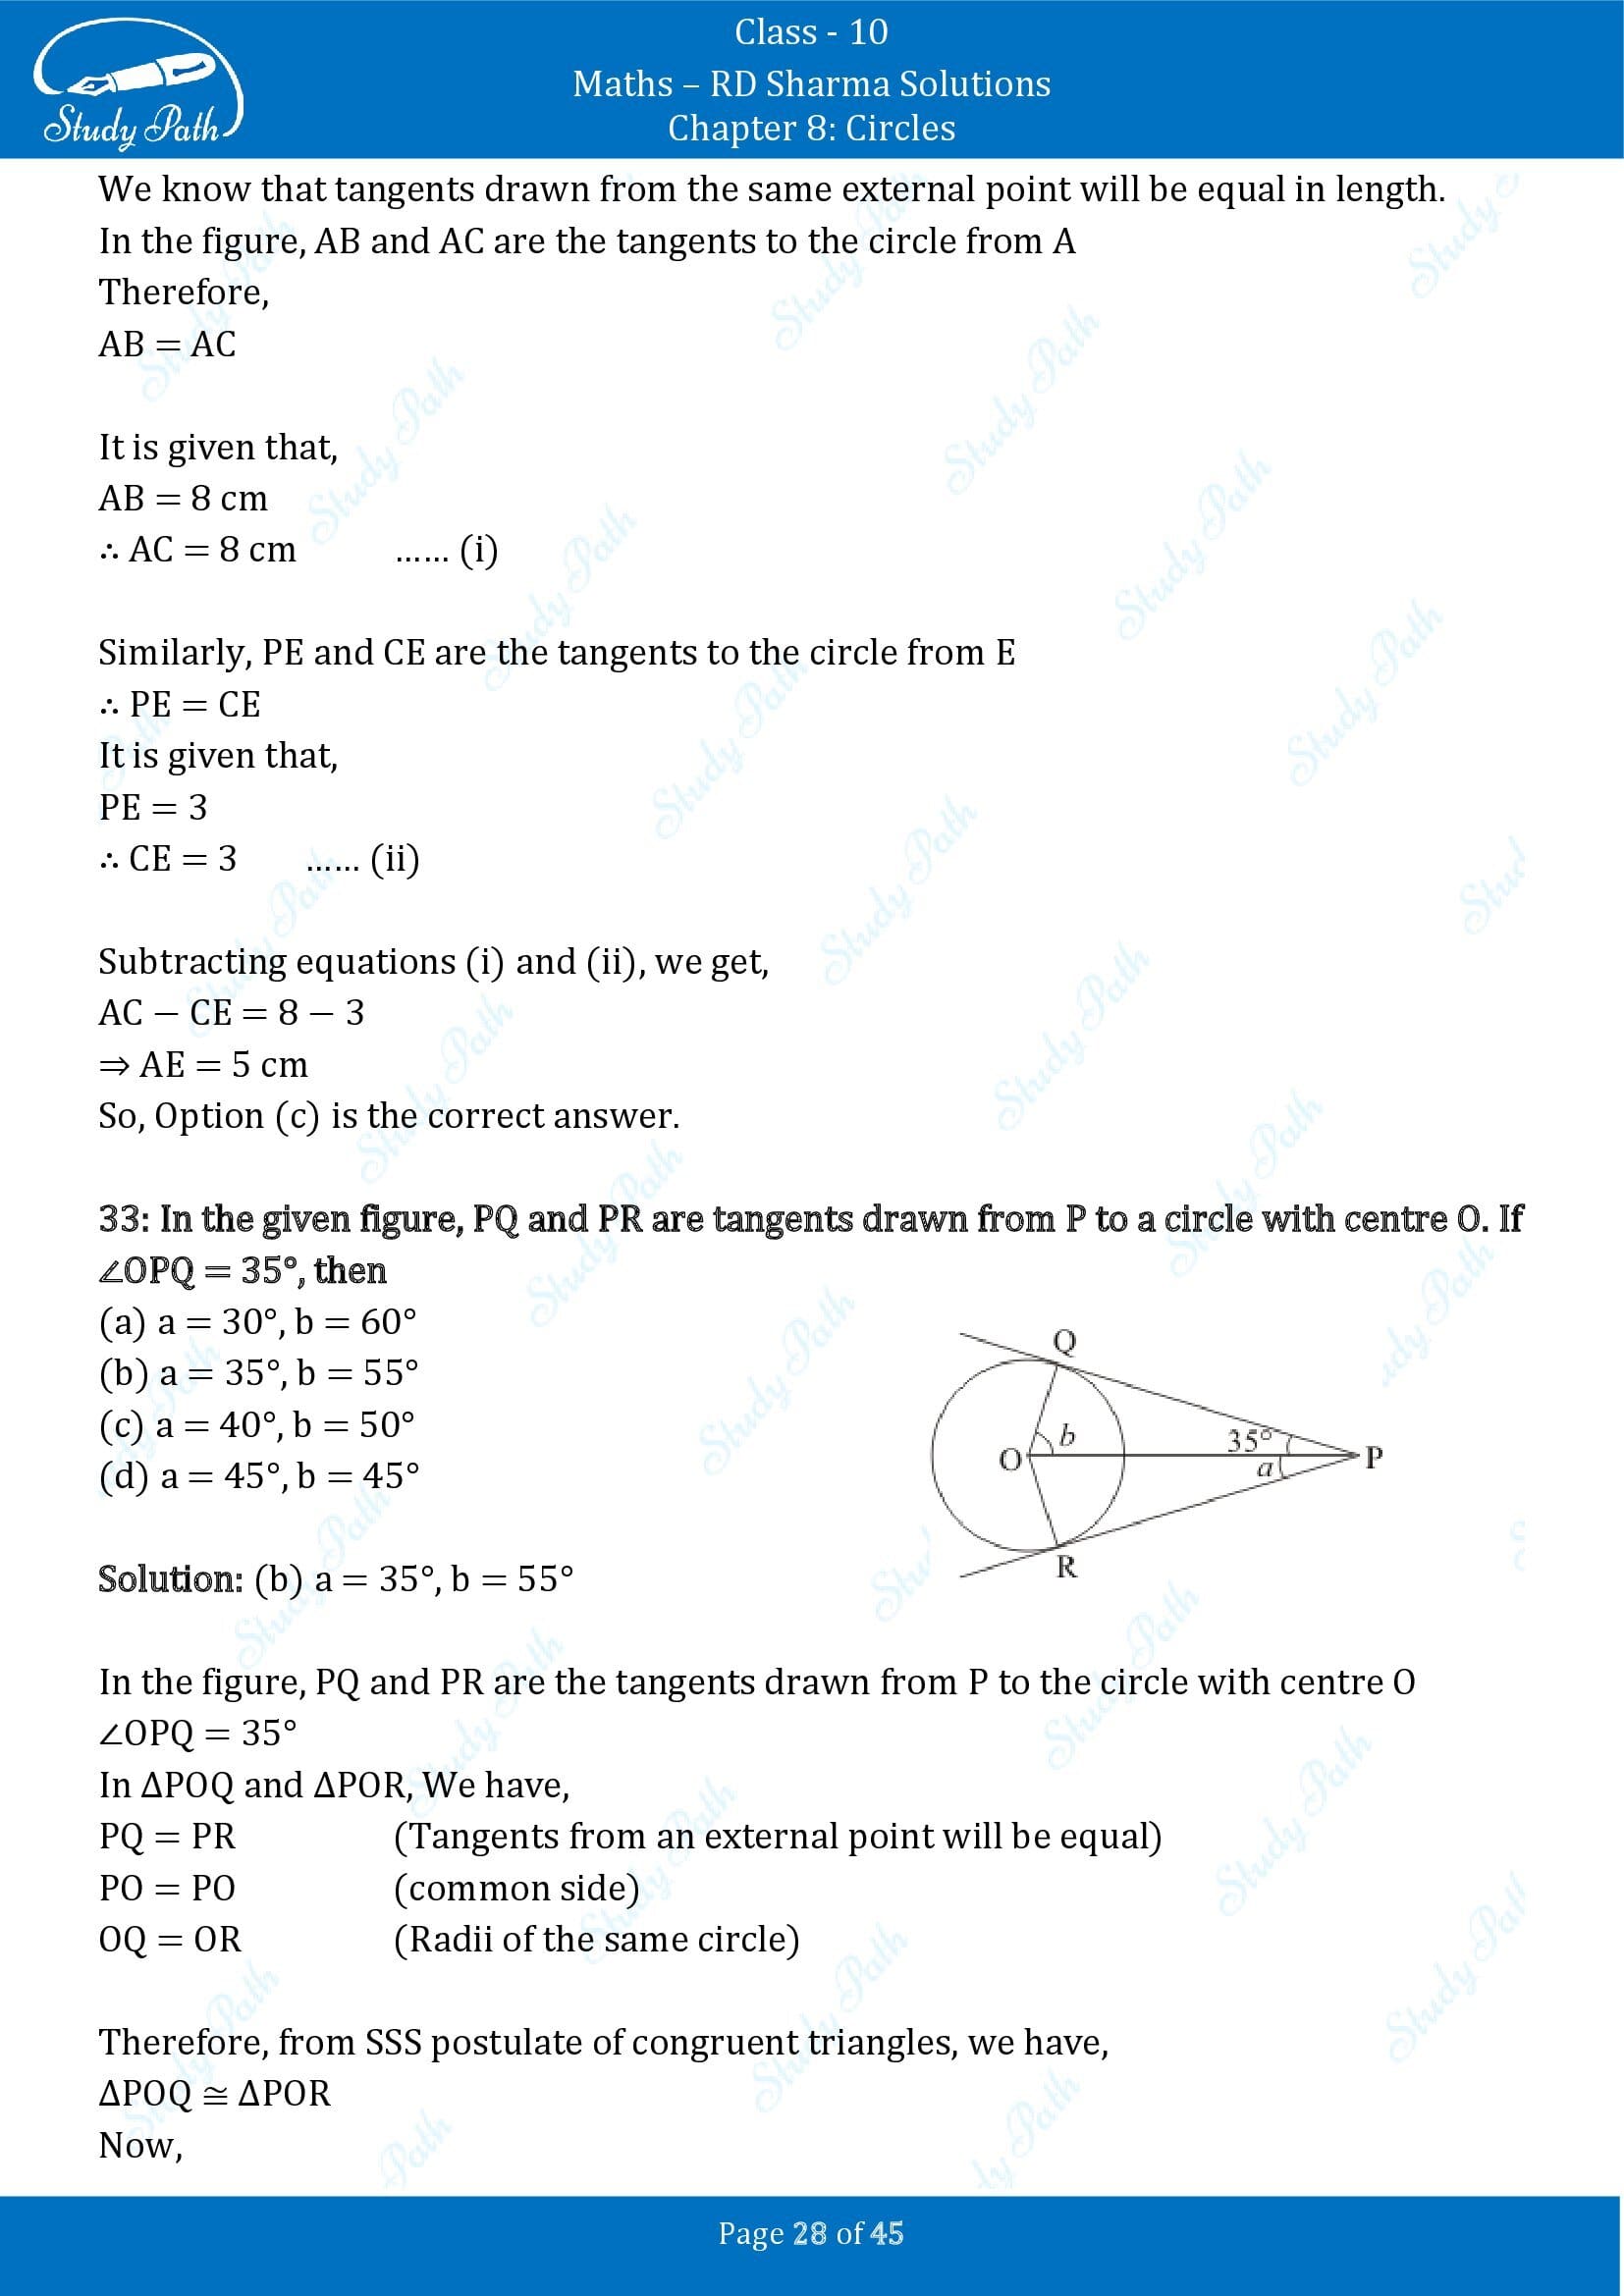 RD Sharma Solutions Class 10 Chapter 8 Circles Multiple Choice Questions MCQs 00028